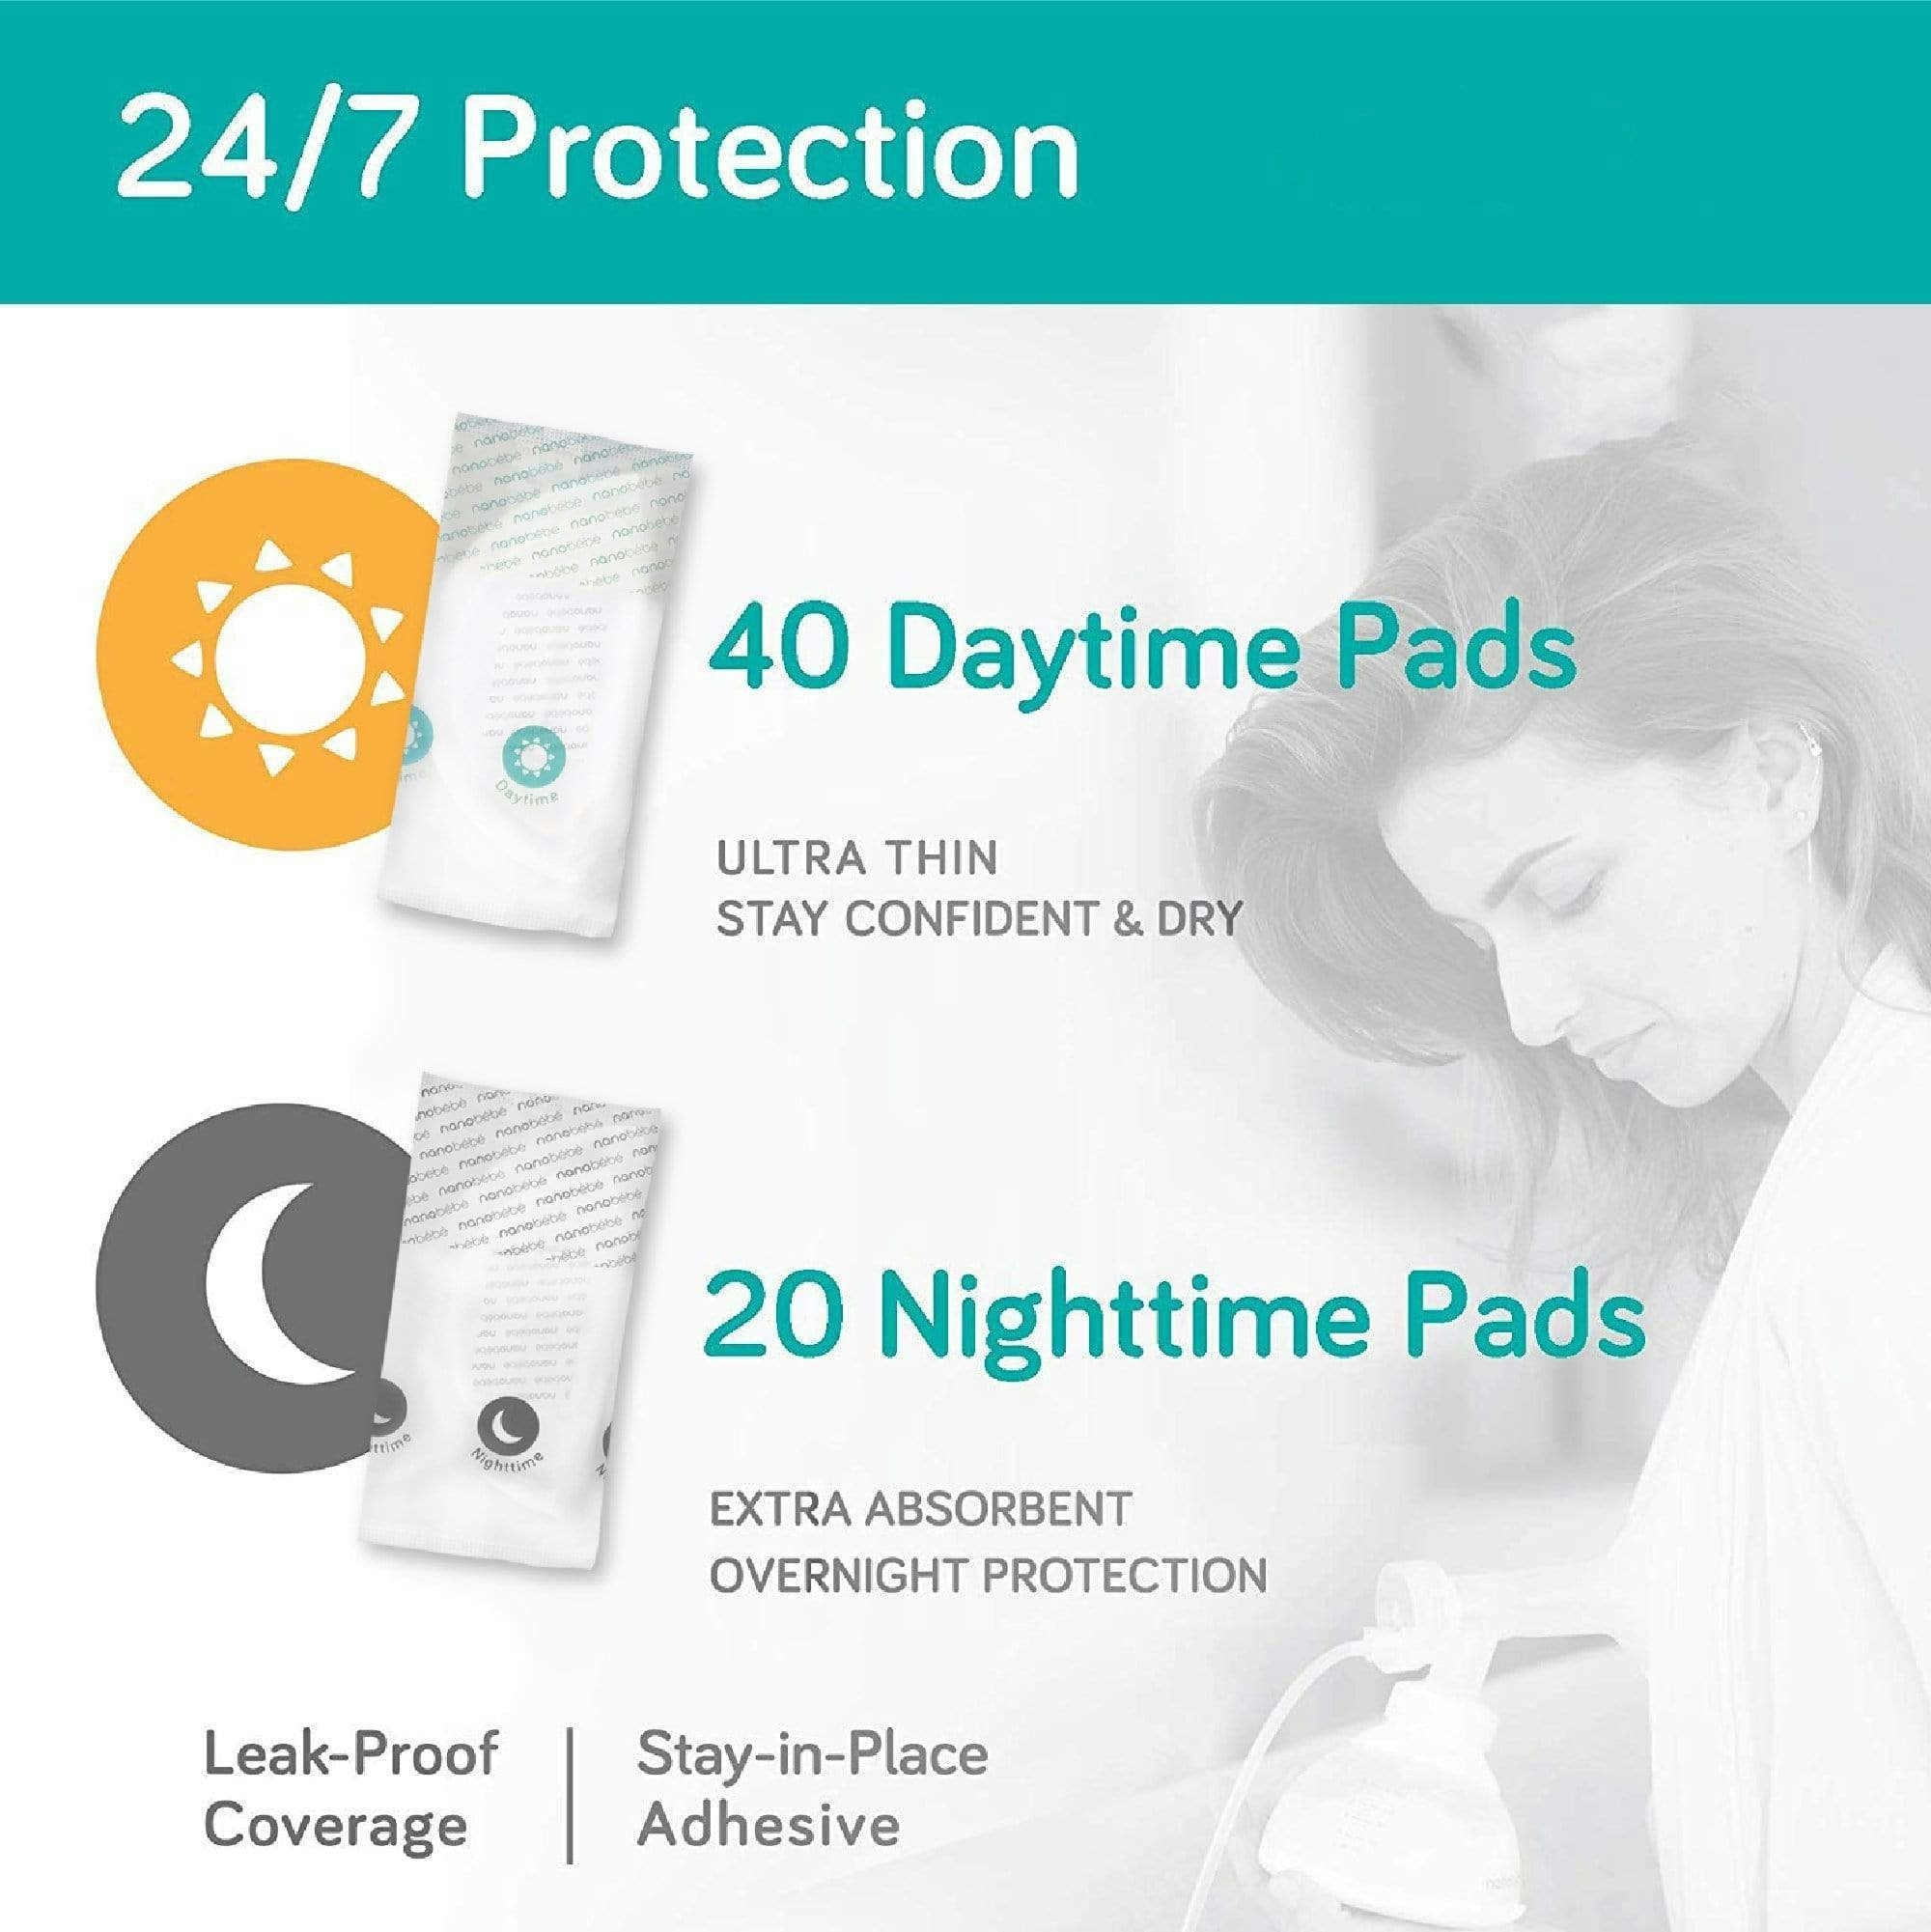 Nursing Pads (35 products) compare now & find price »